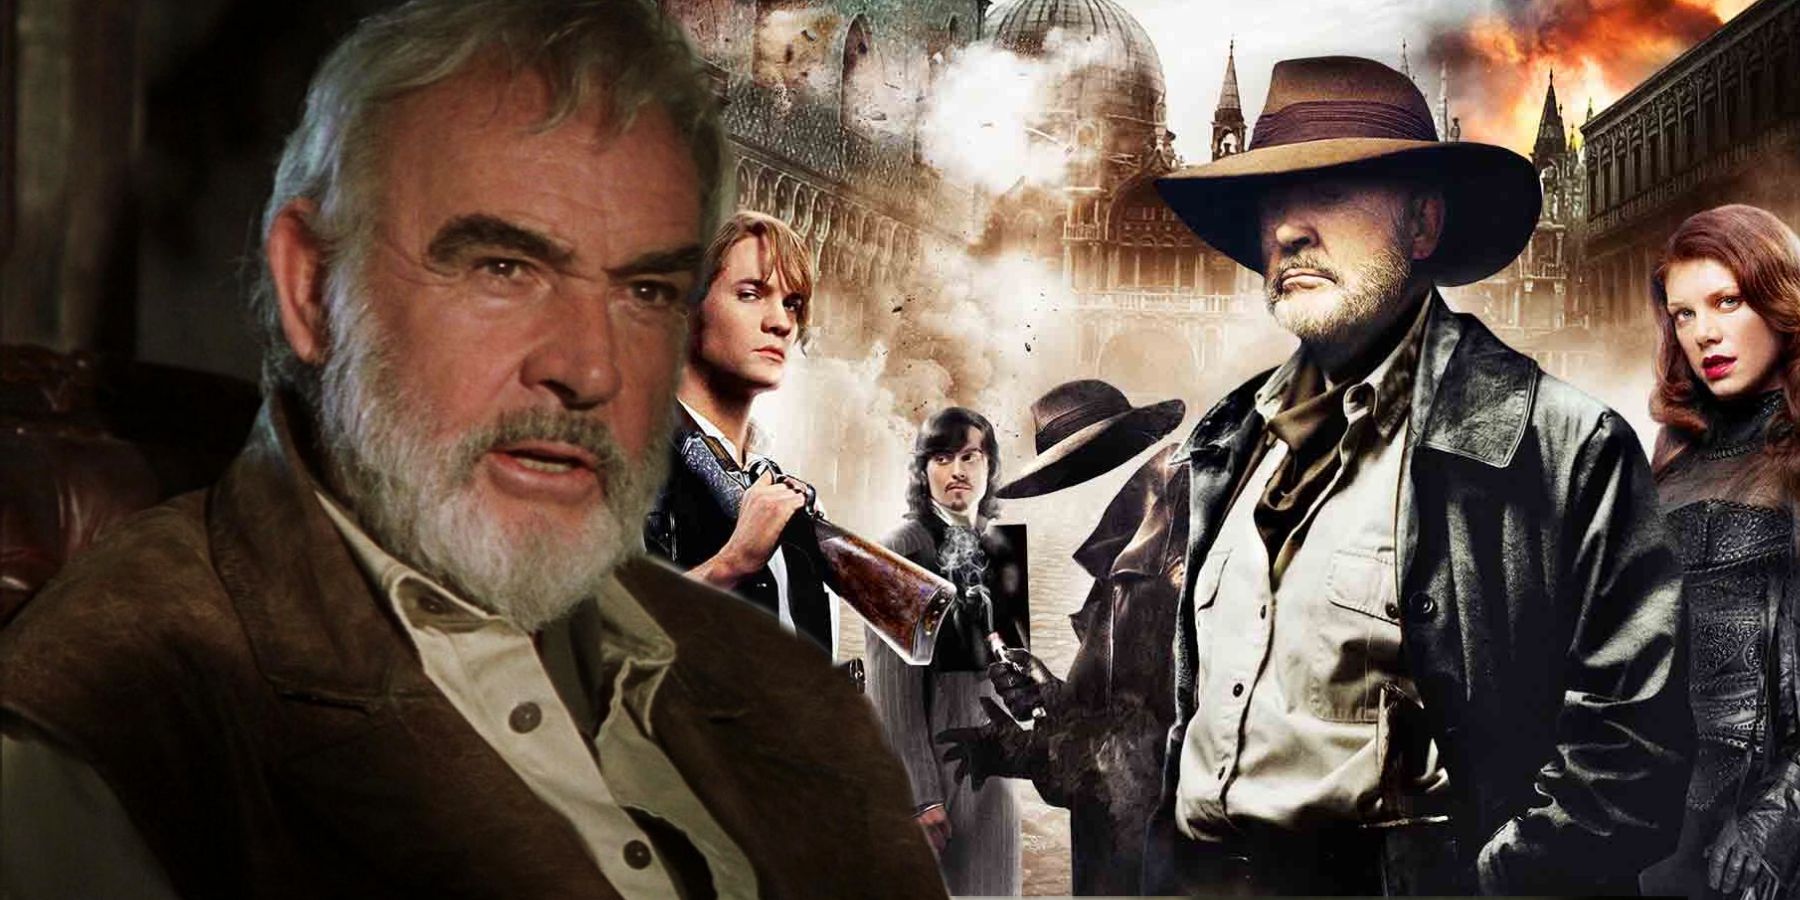 Sean Connery and the poster for League of Extraordinary Gentlemen